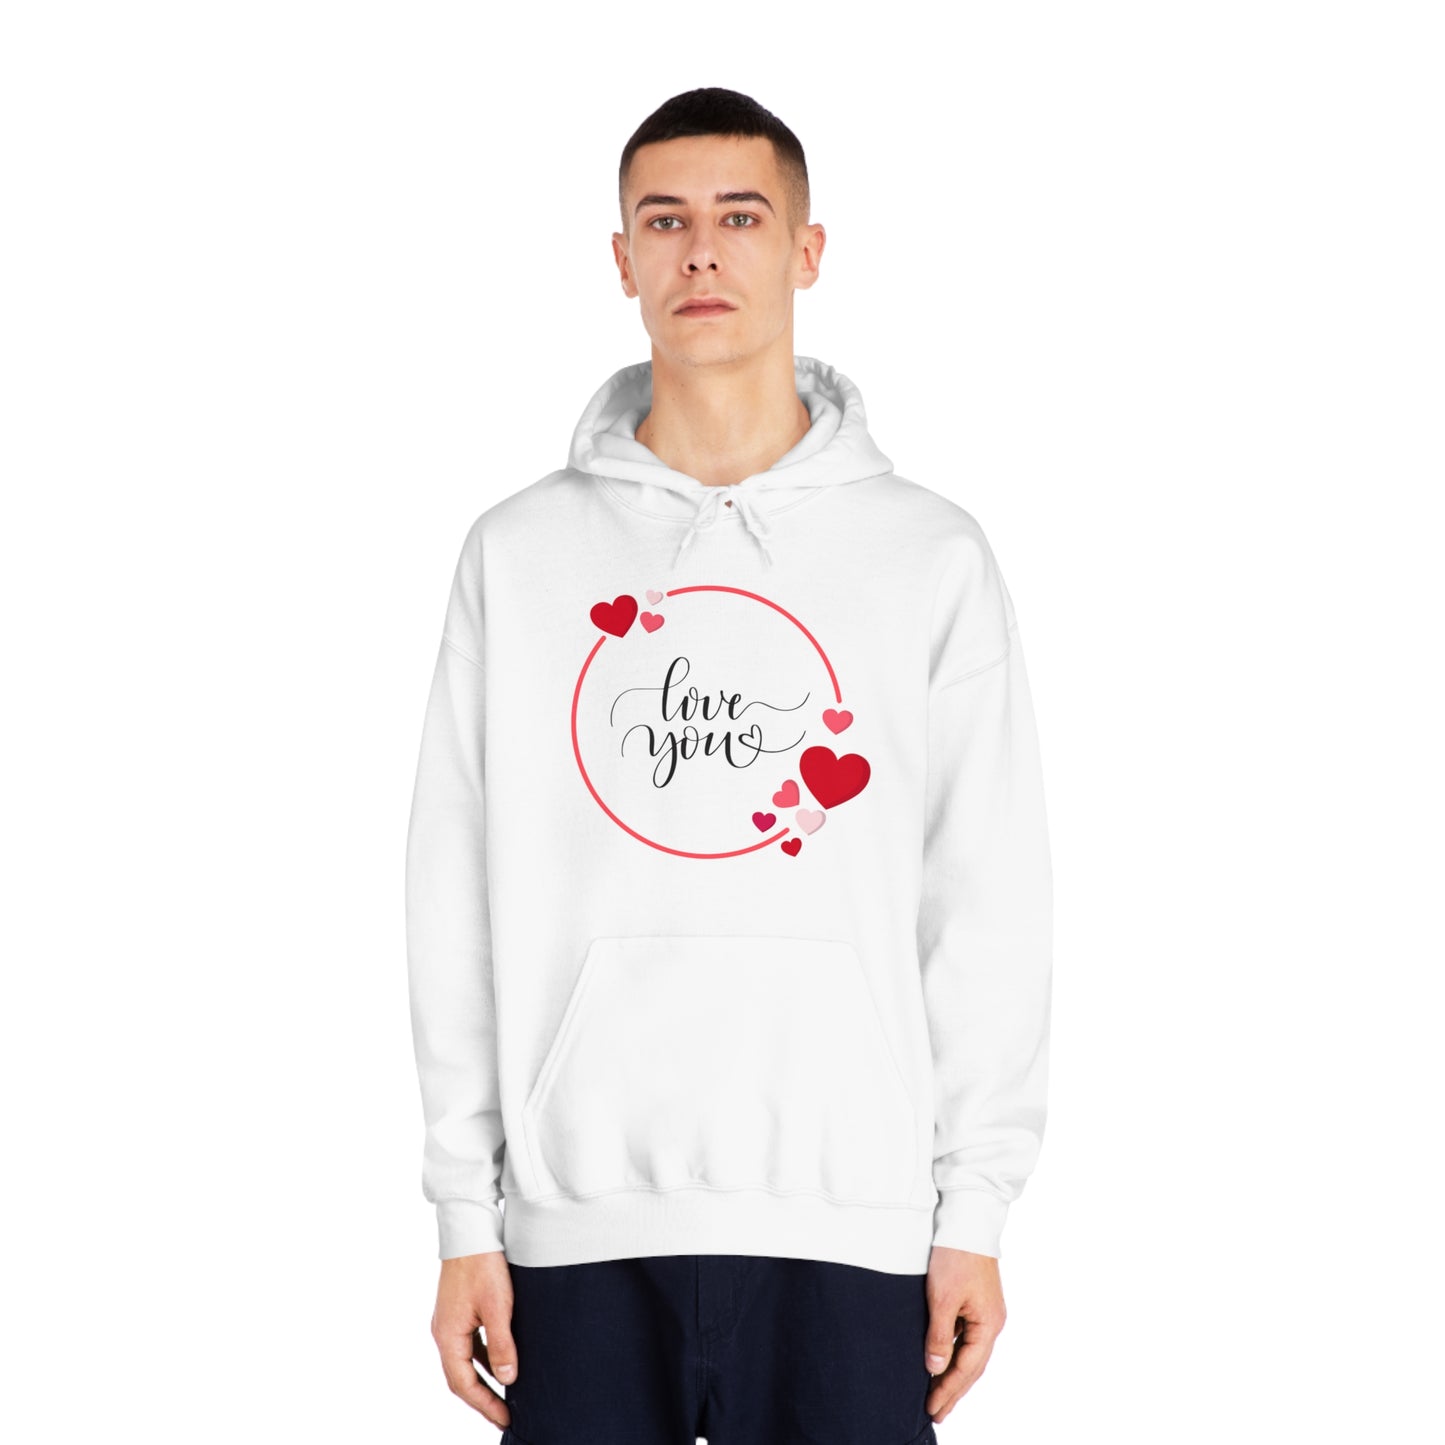 Love You with Hearts Printed Unisex DryBlend® Hooded Sweatshirt, White & Red